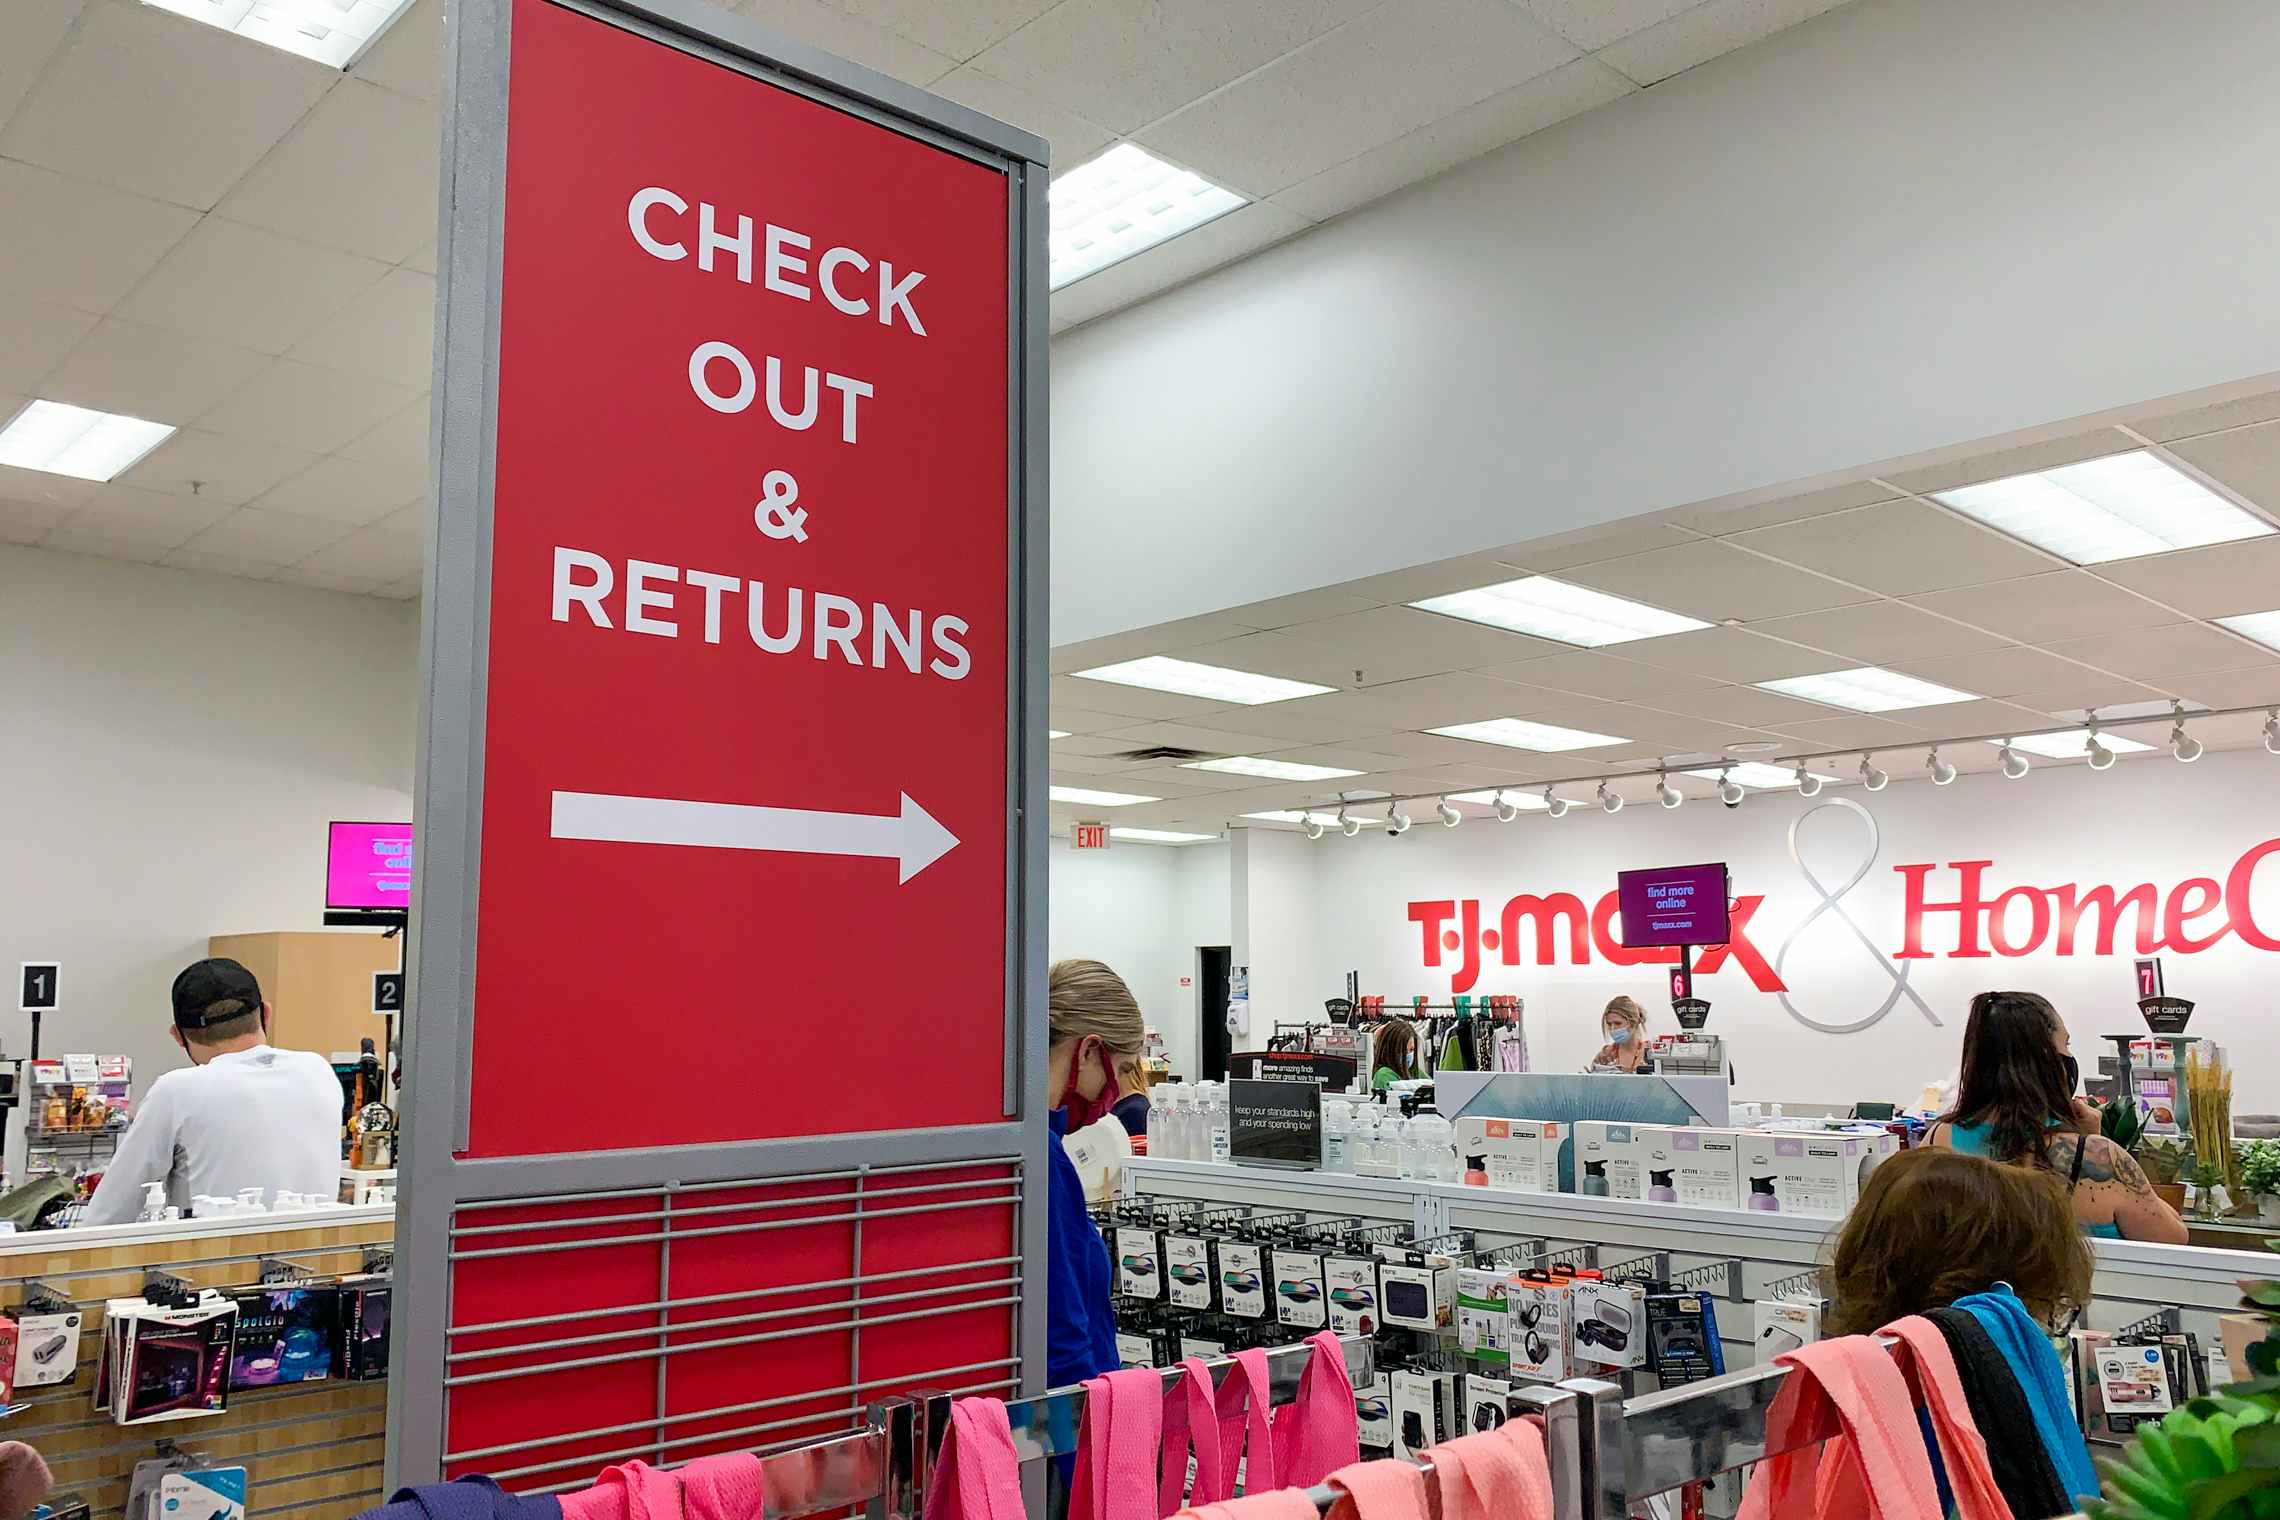 customers in line near tj maxx check out and returns signage